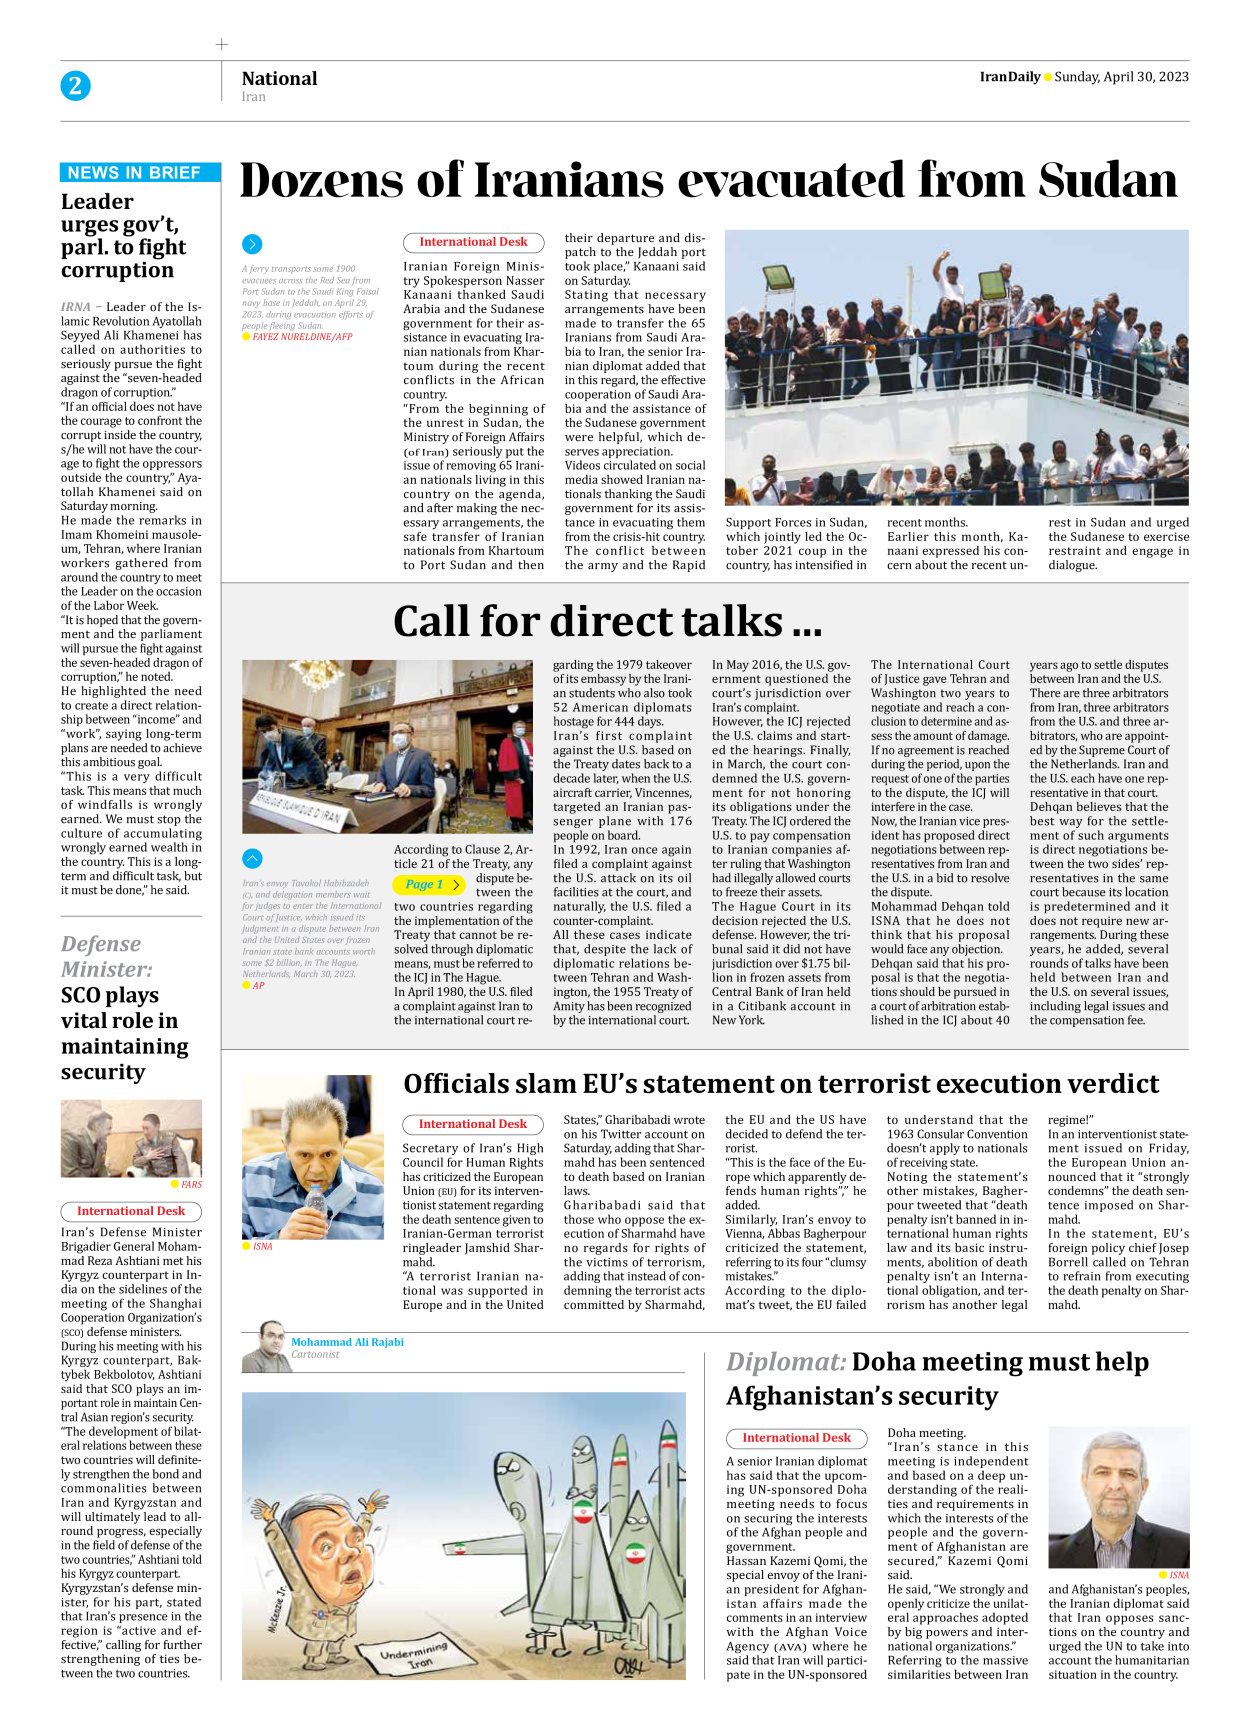 Iran Daily - Number Seven Thousand Two Hundred and Seventy Nine - 30 April 2023 - Page 2